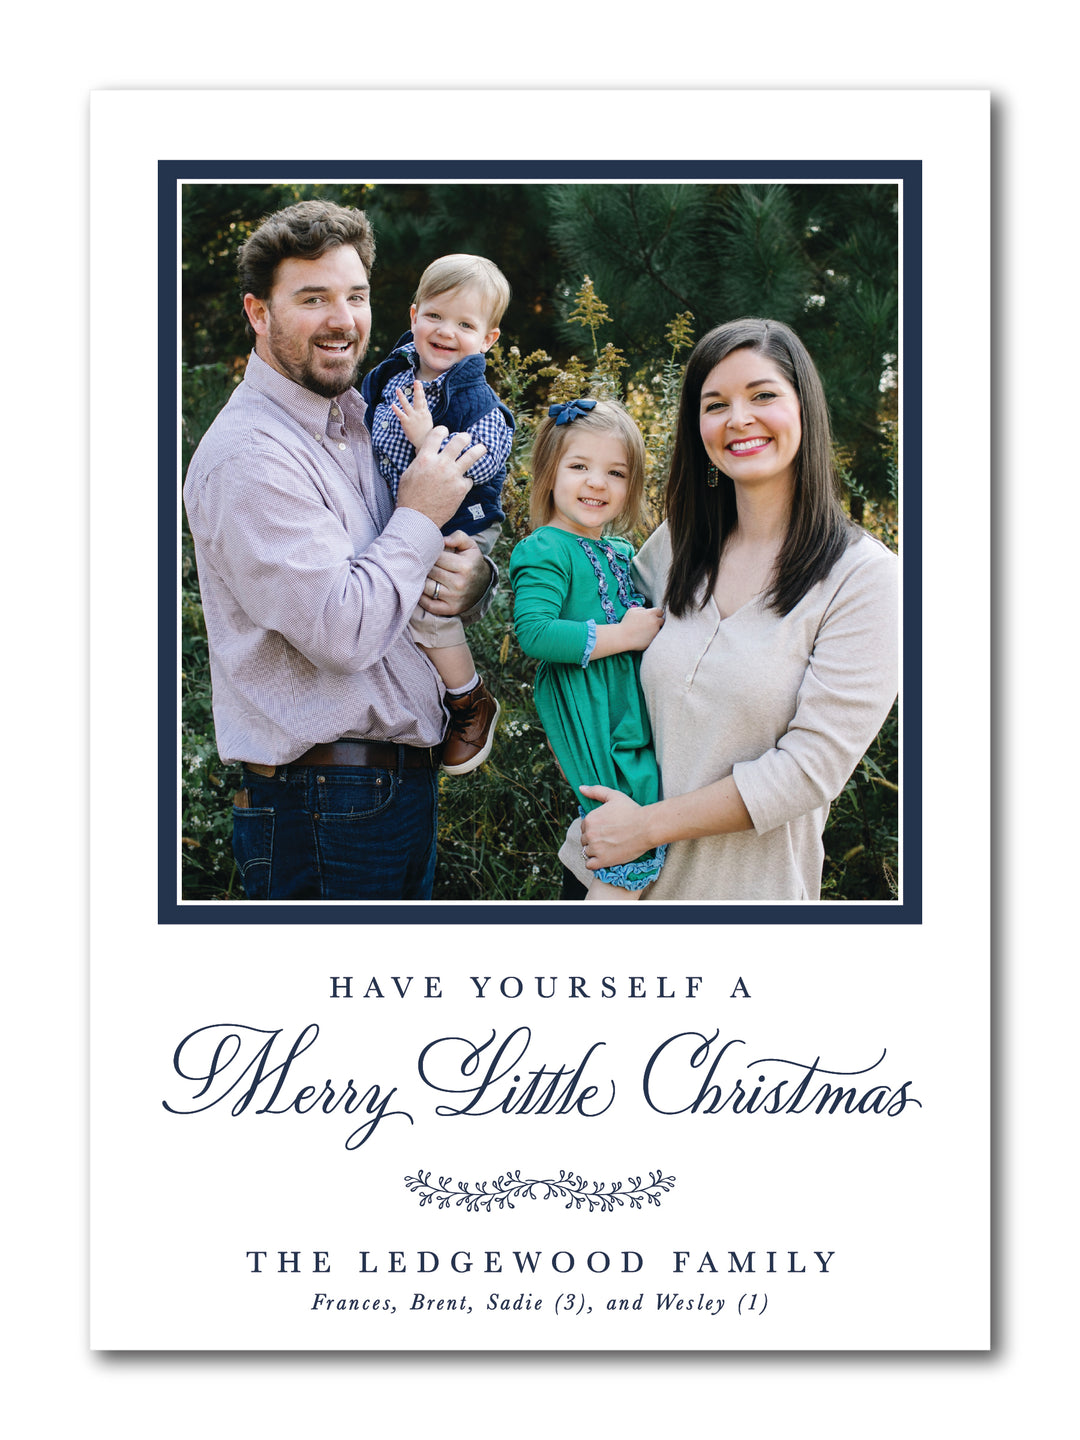 The Brent Christmas Card